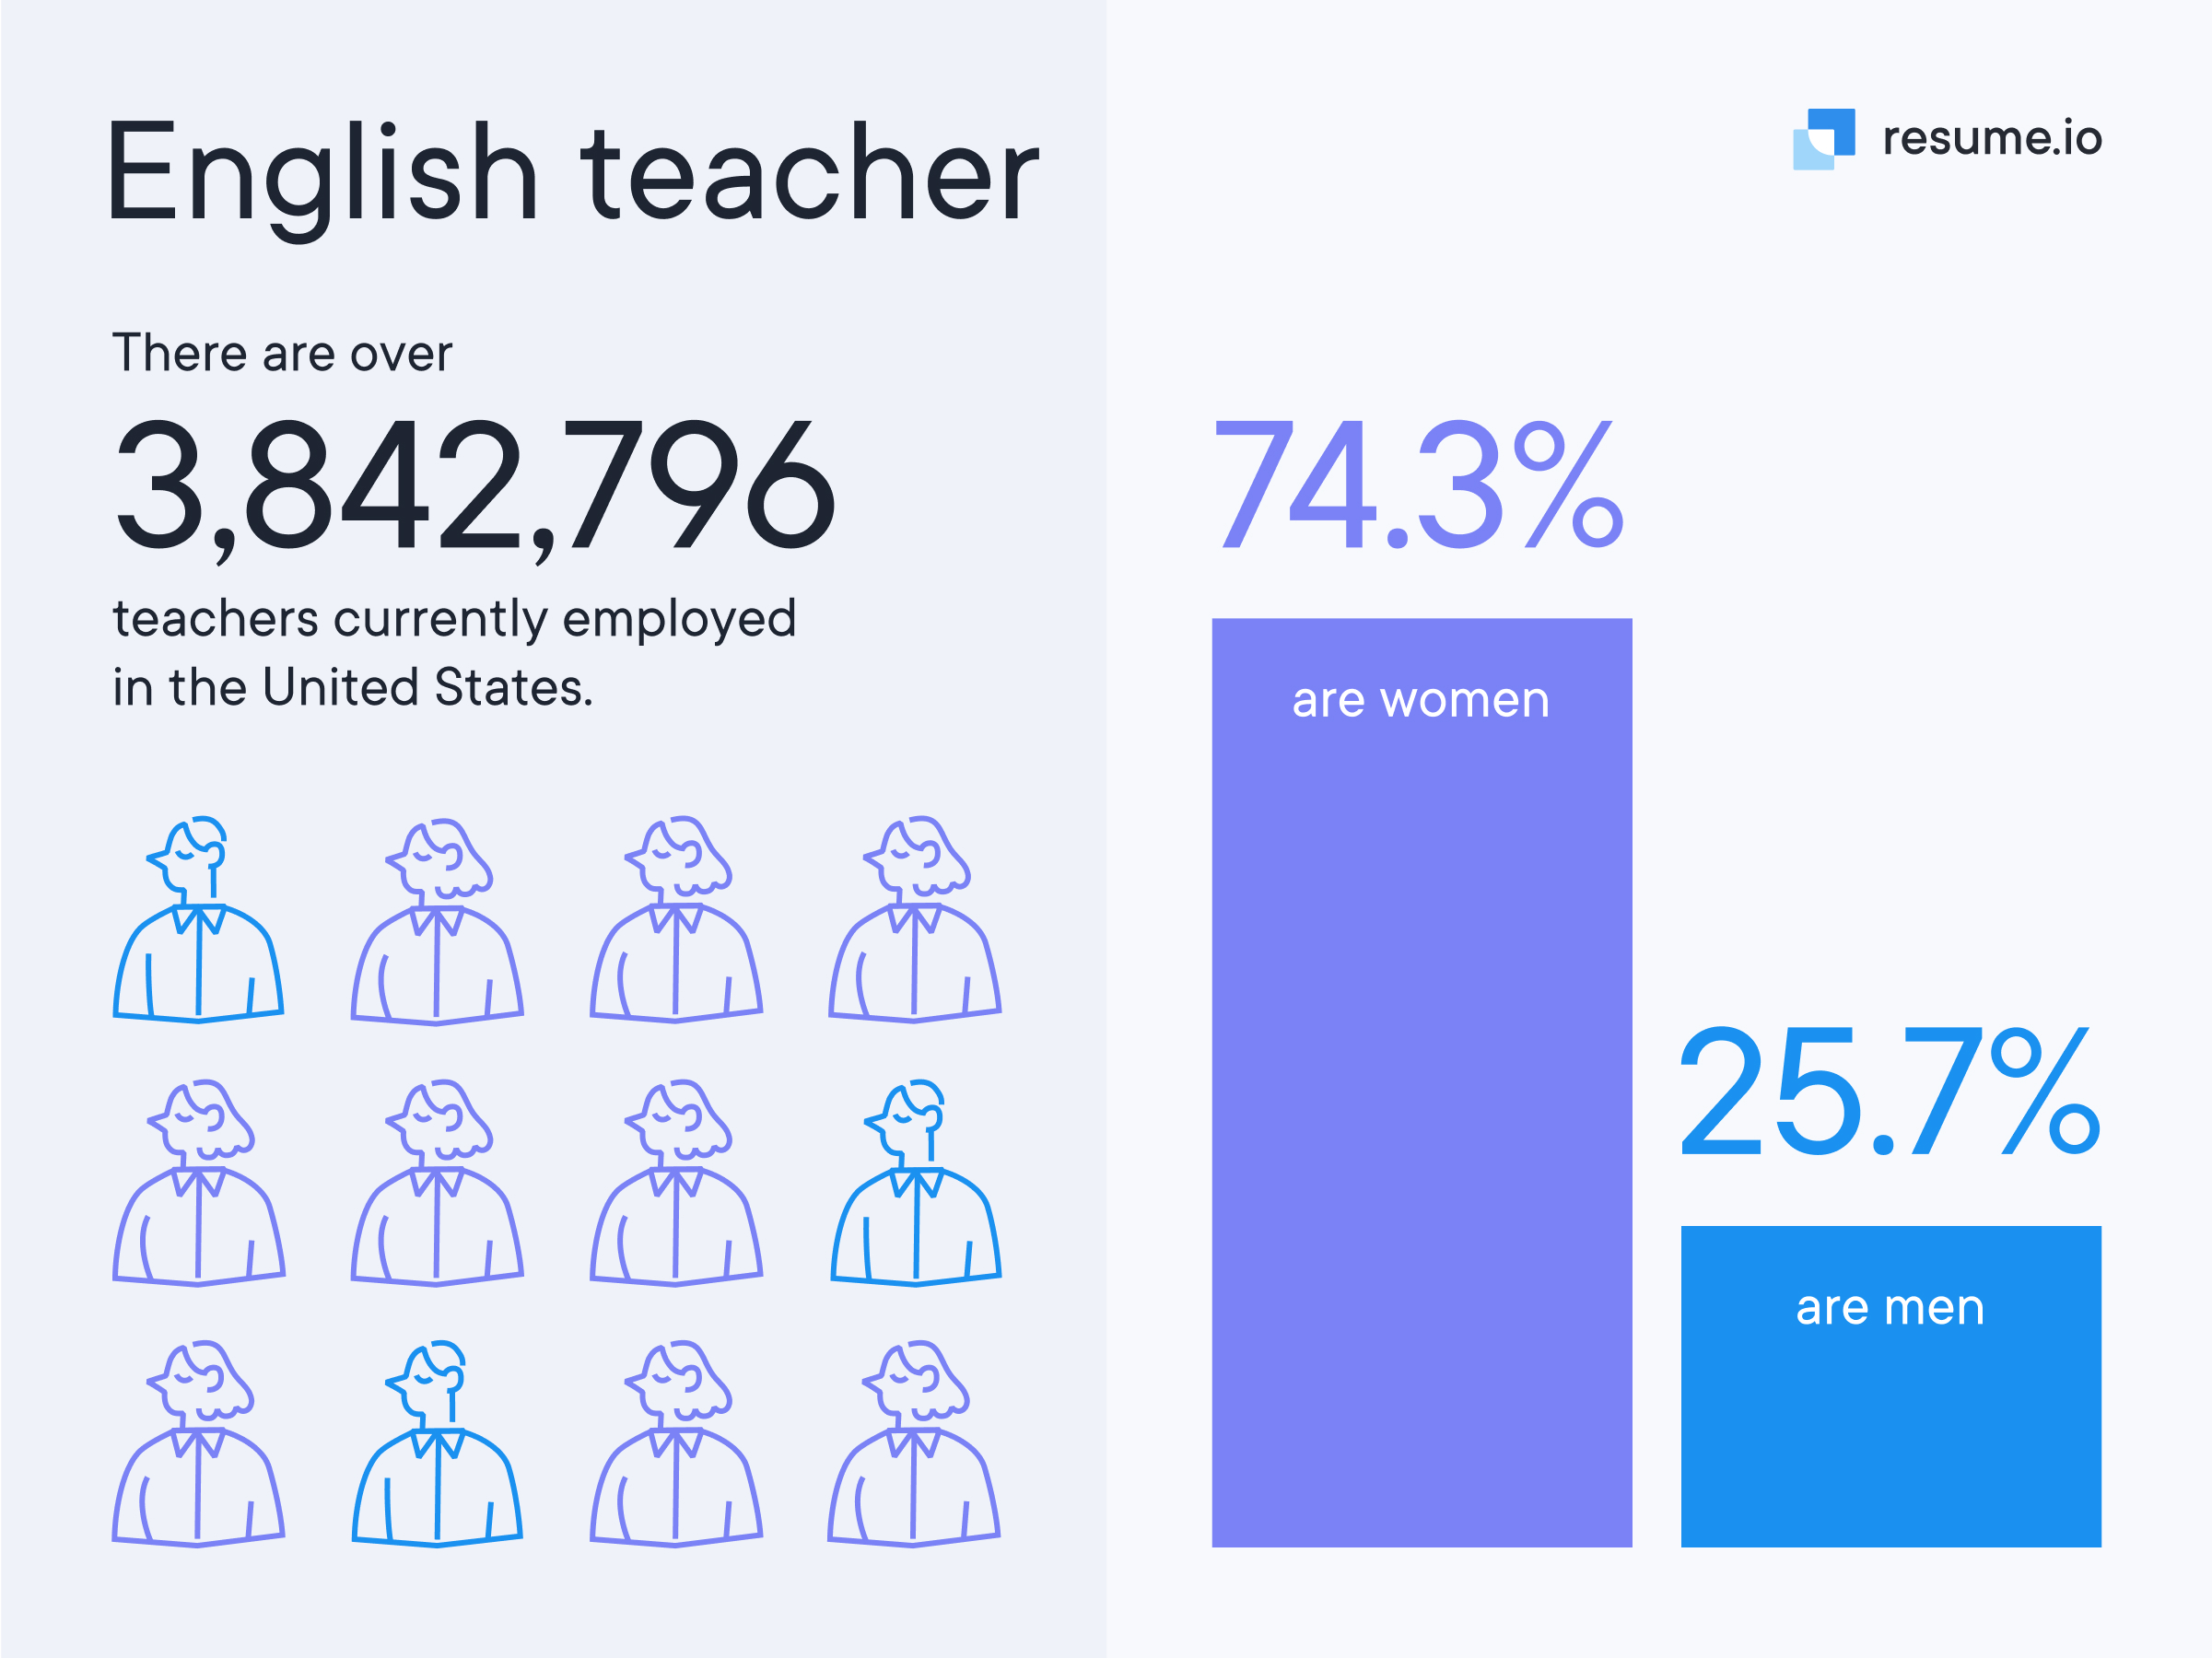 Statistical facts about an English teacher